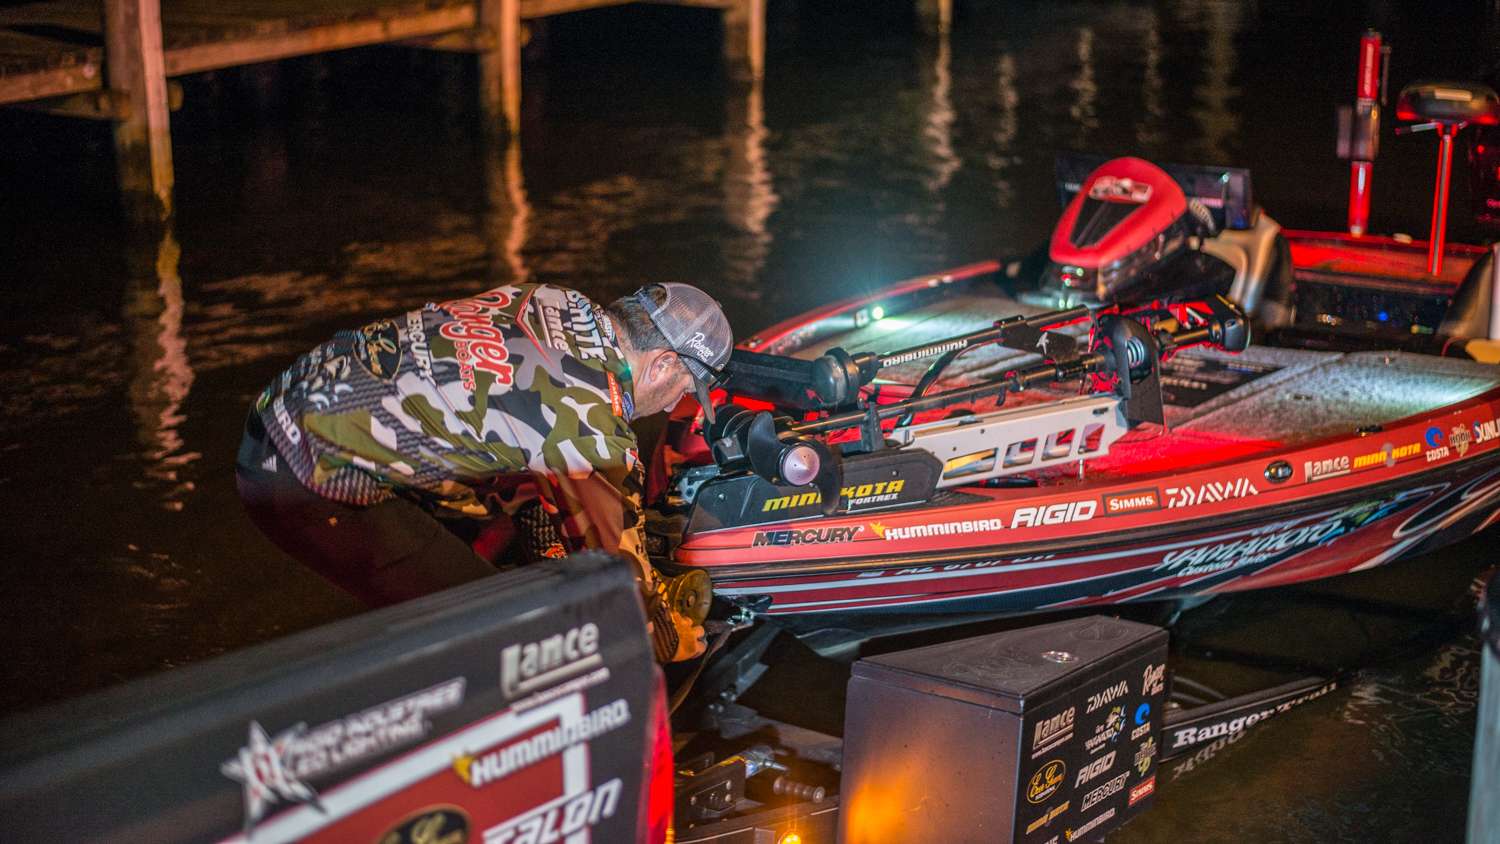 The Top 12 get ready to head out on the final day of the Bassmaster Elite at Potomac River presented by Econo Lodge. Here Brett Hite releases his boat. 